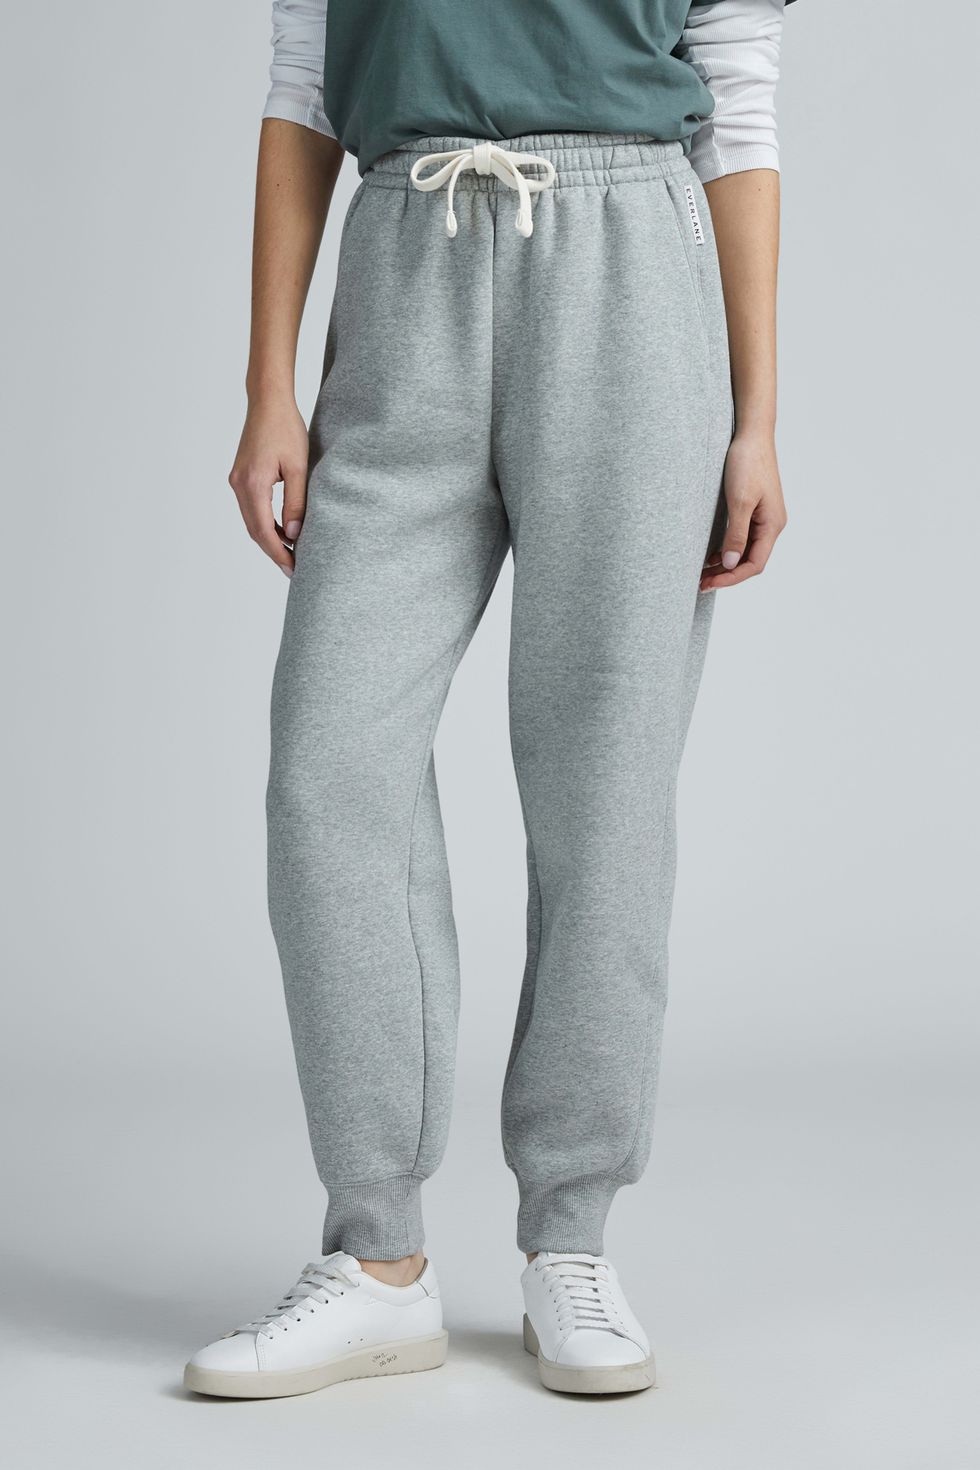 18 Best Sweatpants & Joggers for Women 2024 - Cozy and Comfortable